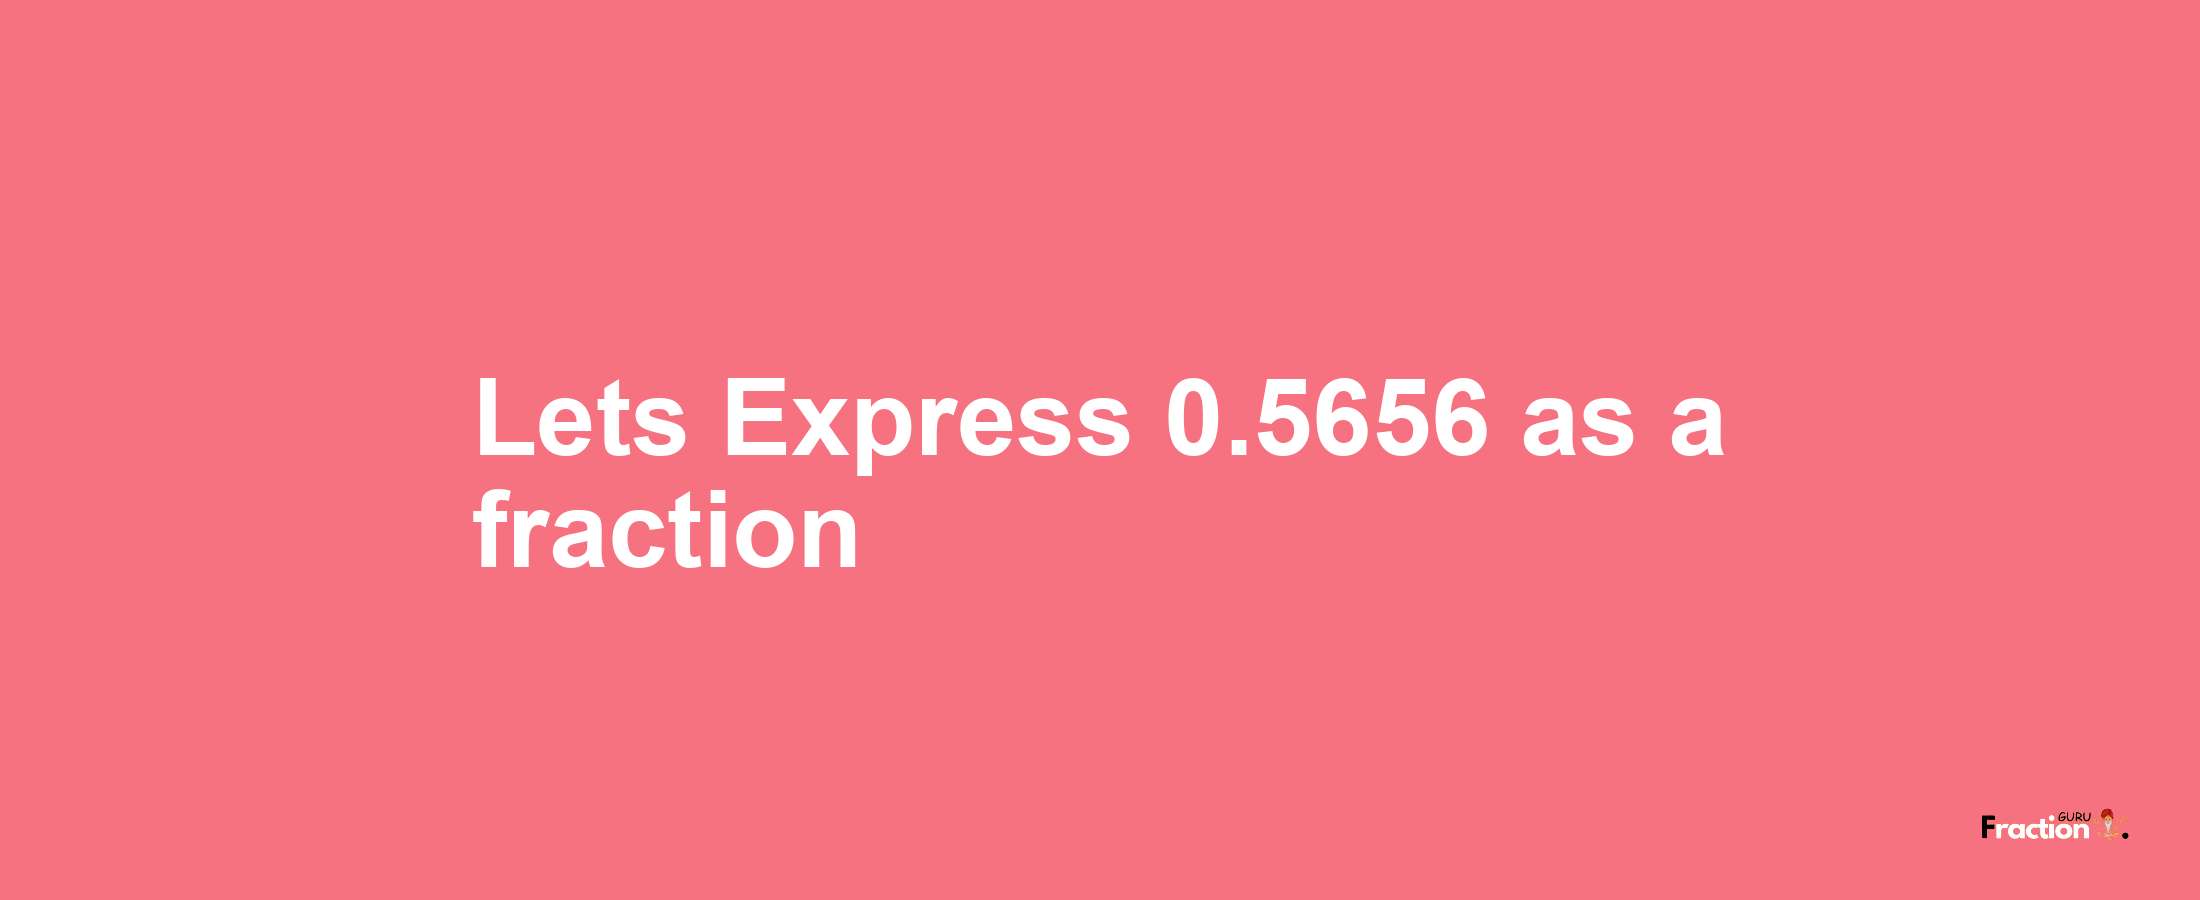 Lets Express 0.5656 as afraction